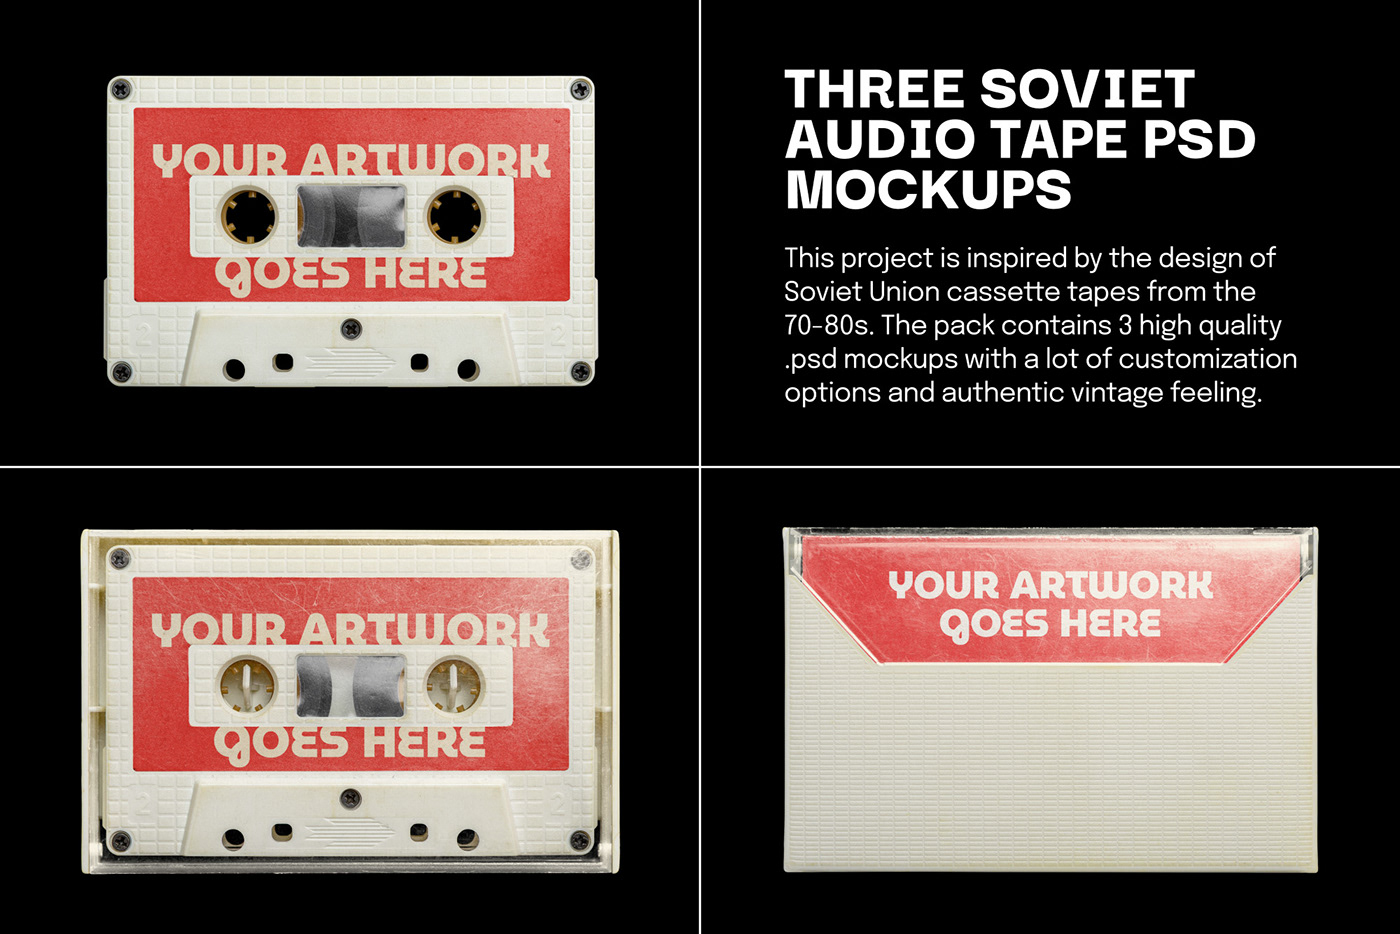 3 cassette tape .psd mockups with a lot of customization options and authentic vintage feeling